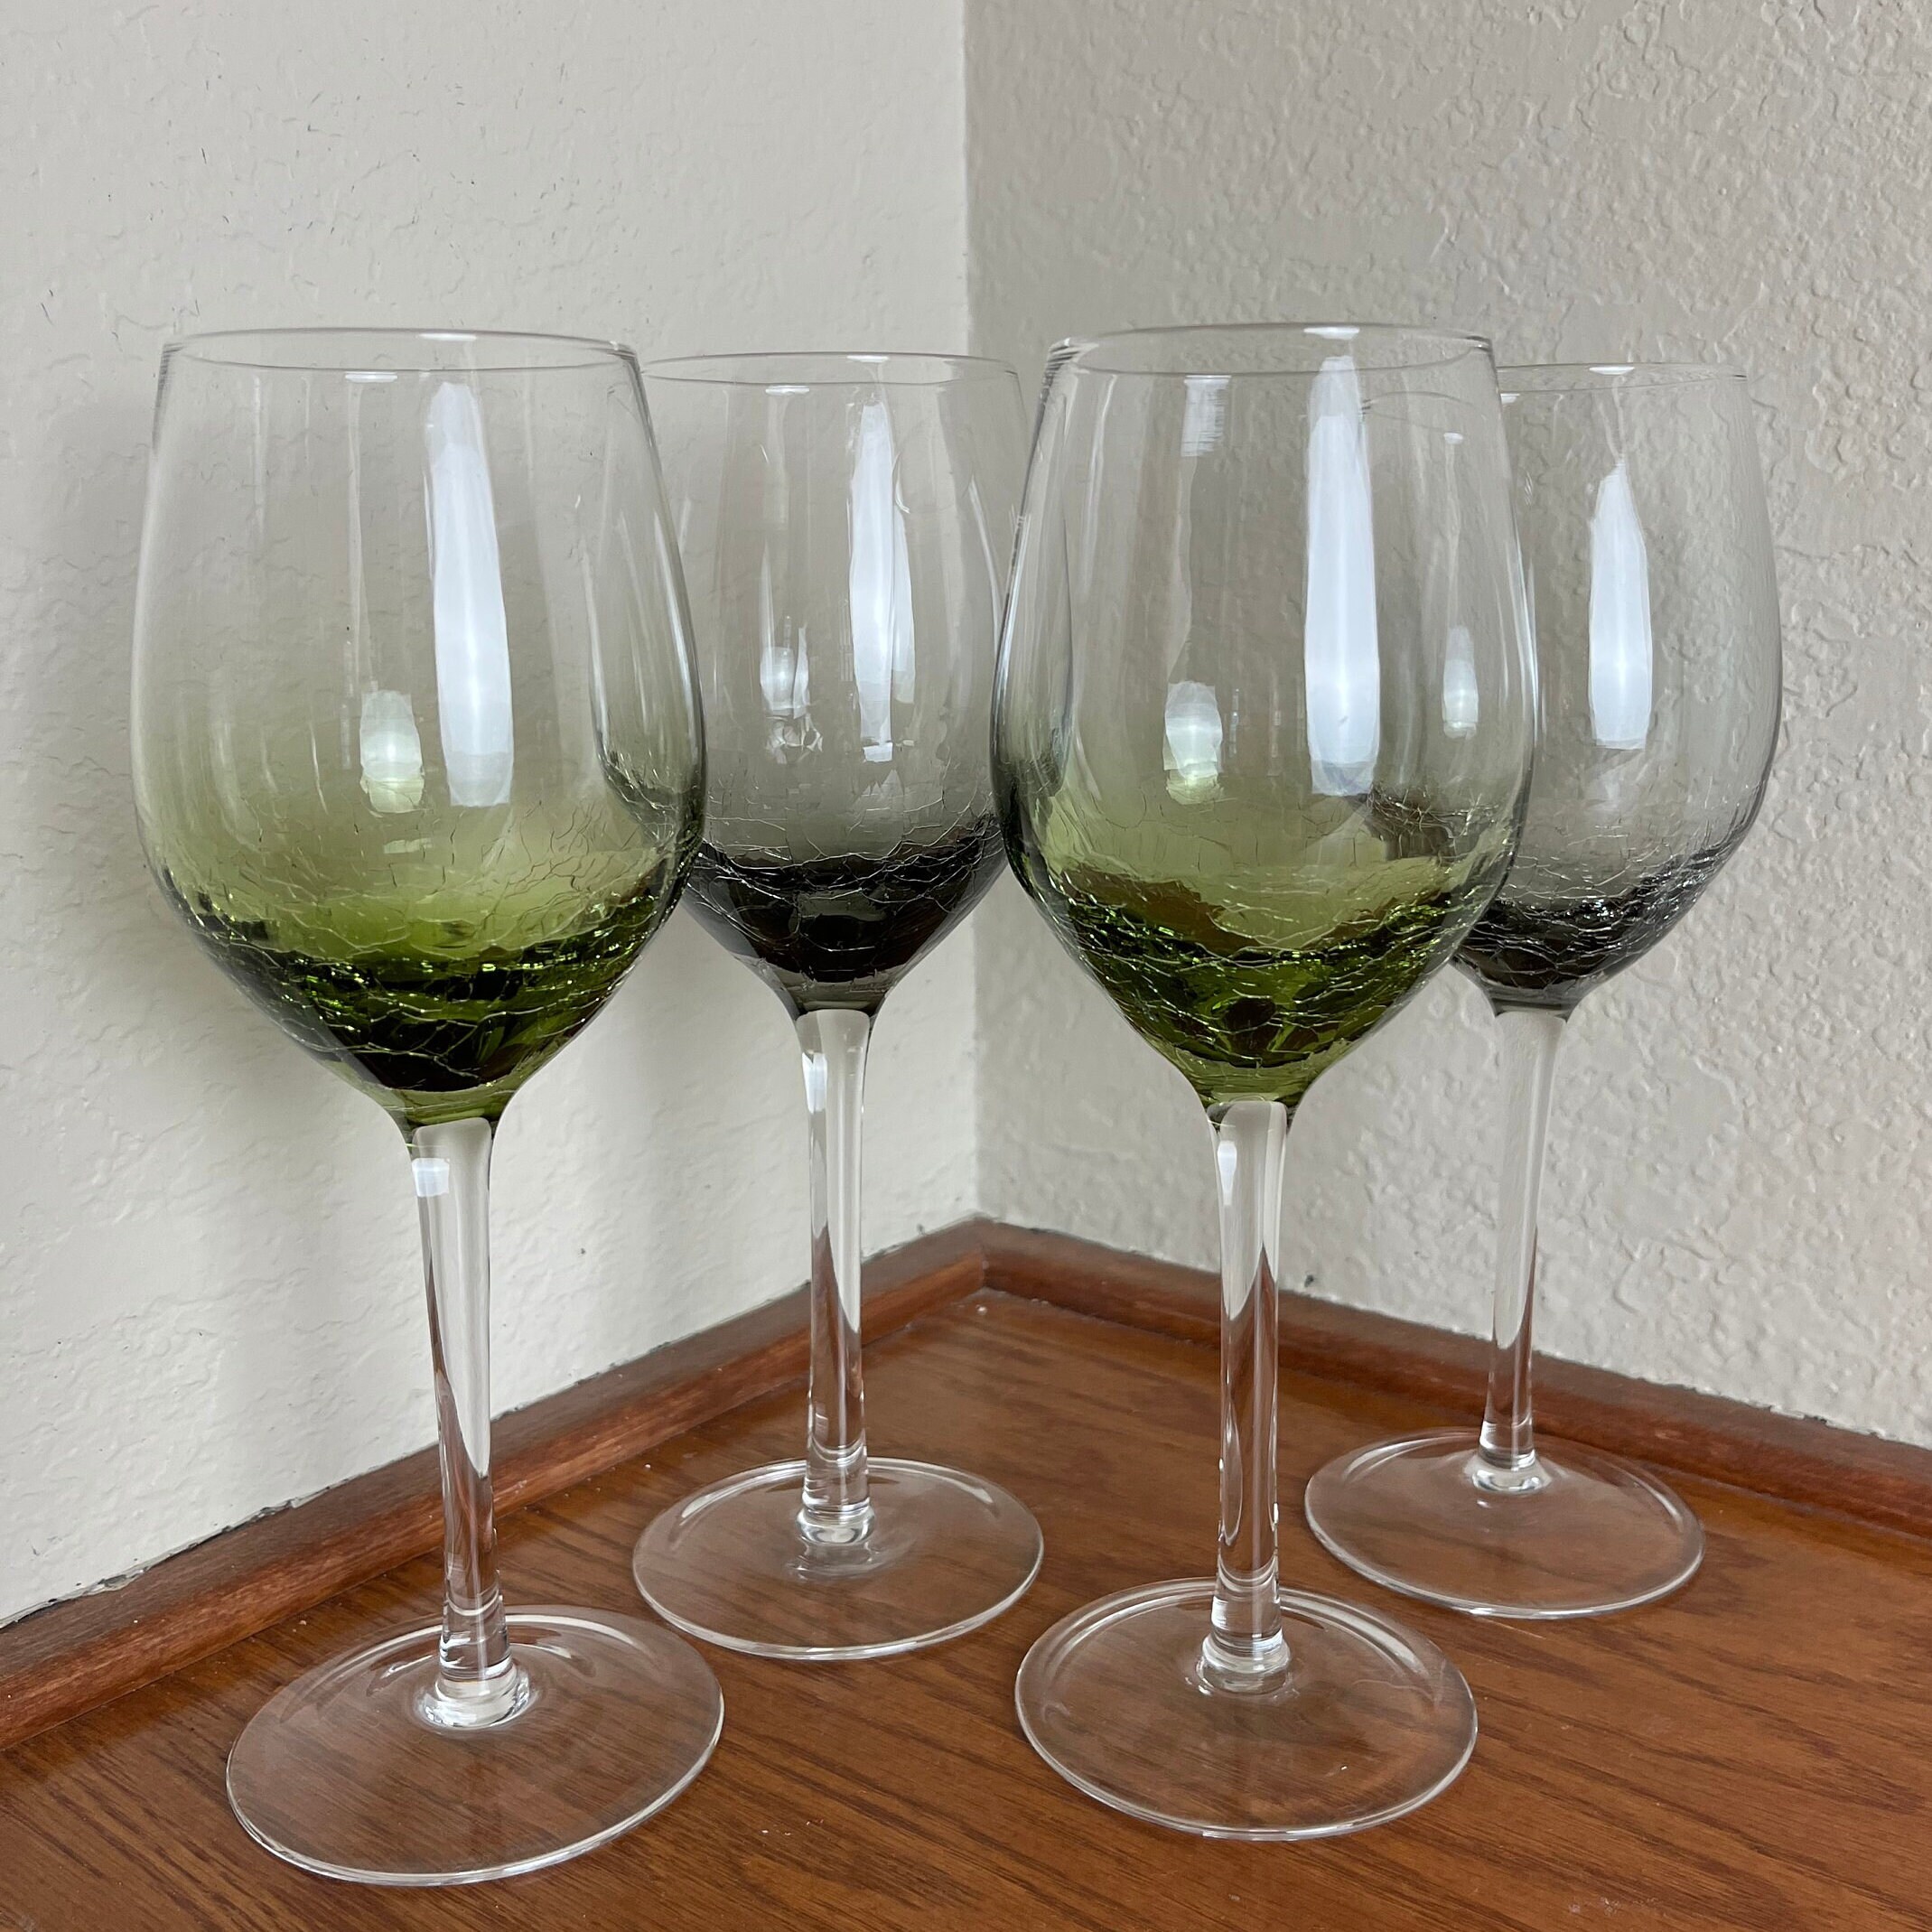 Pier 1, Dining, Pier Green Crackle Red Wine Glasses Set Of 4